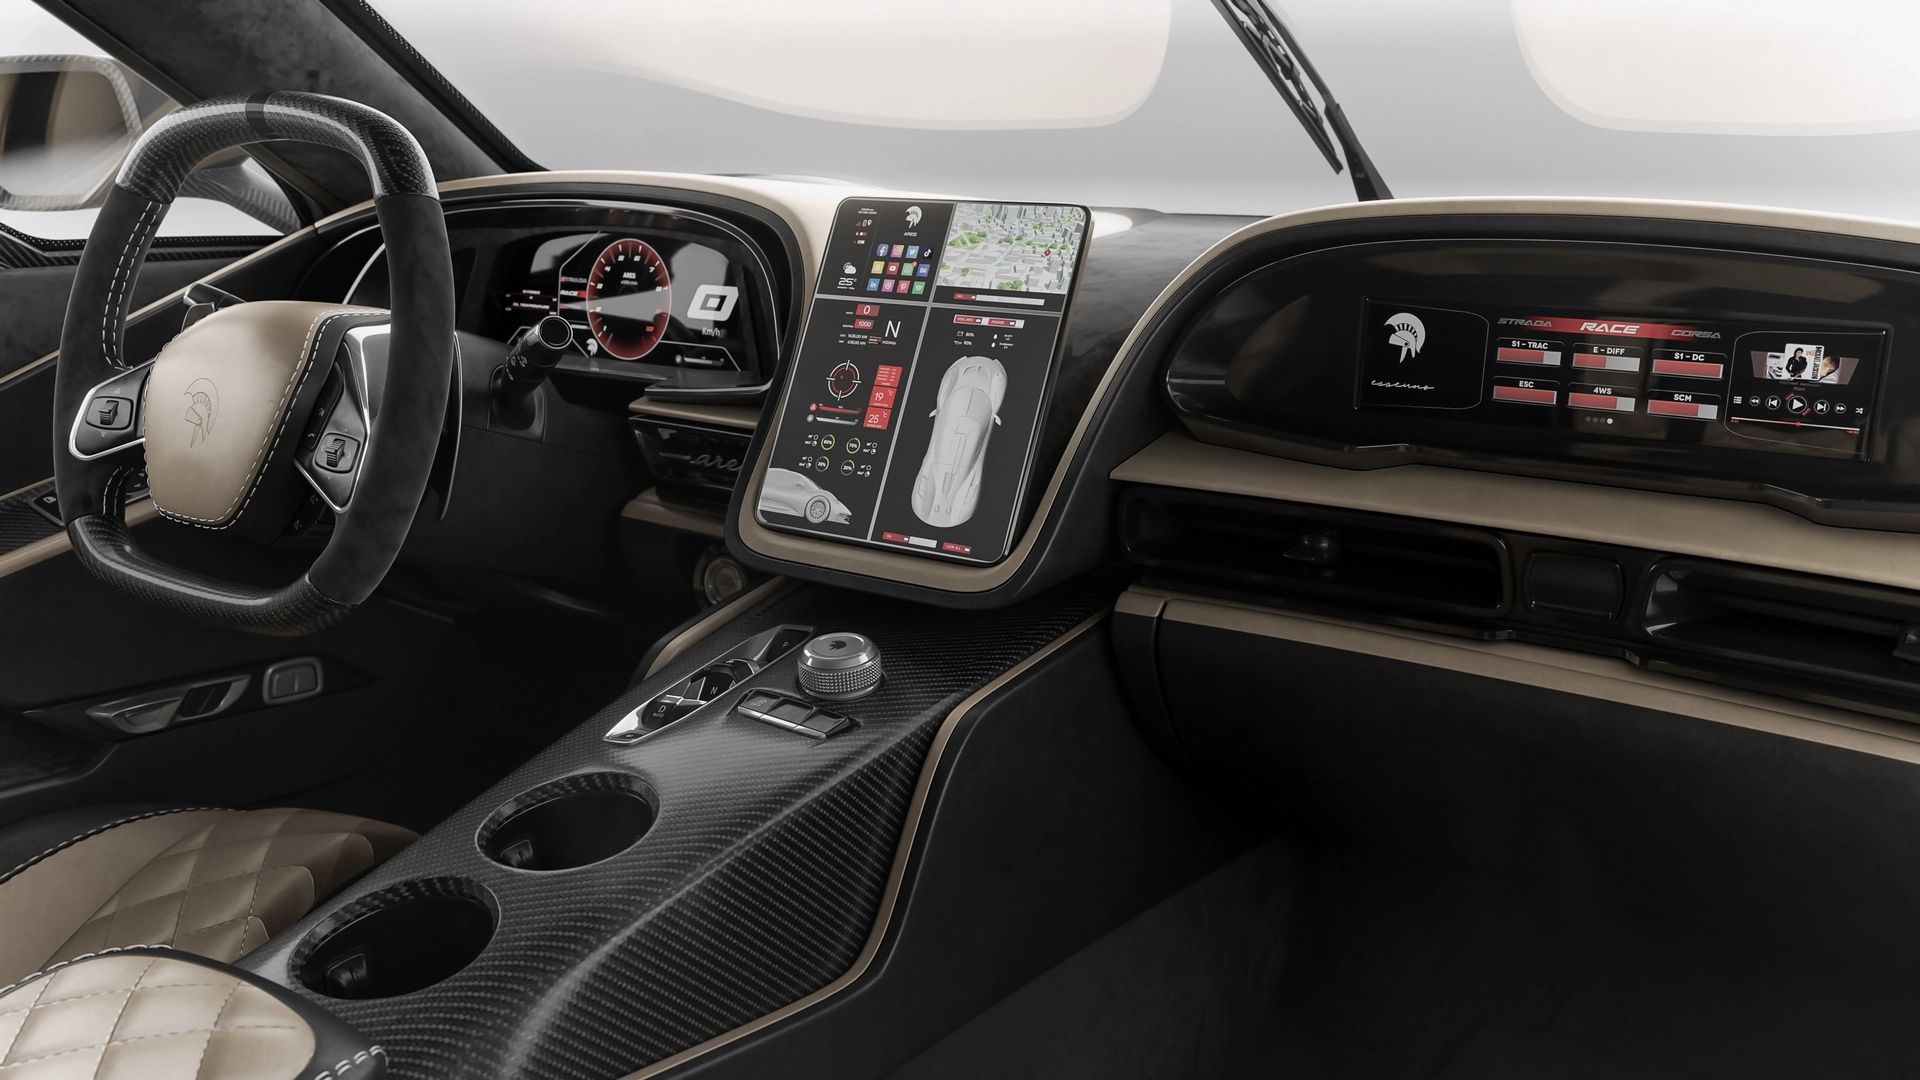 Ares Modena S1 Project (2022) – Interior